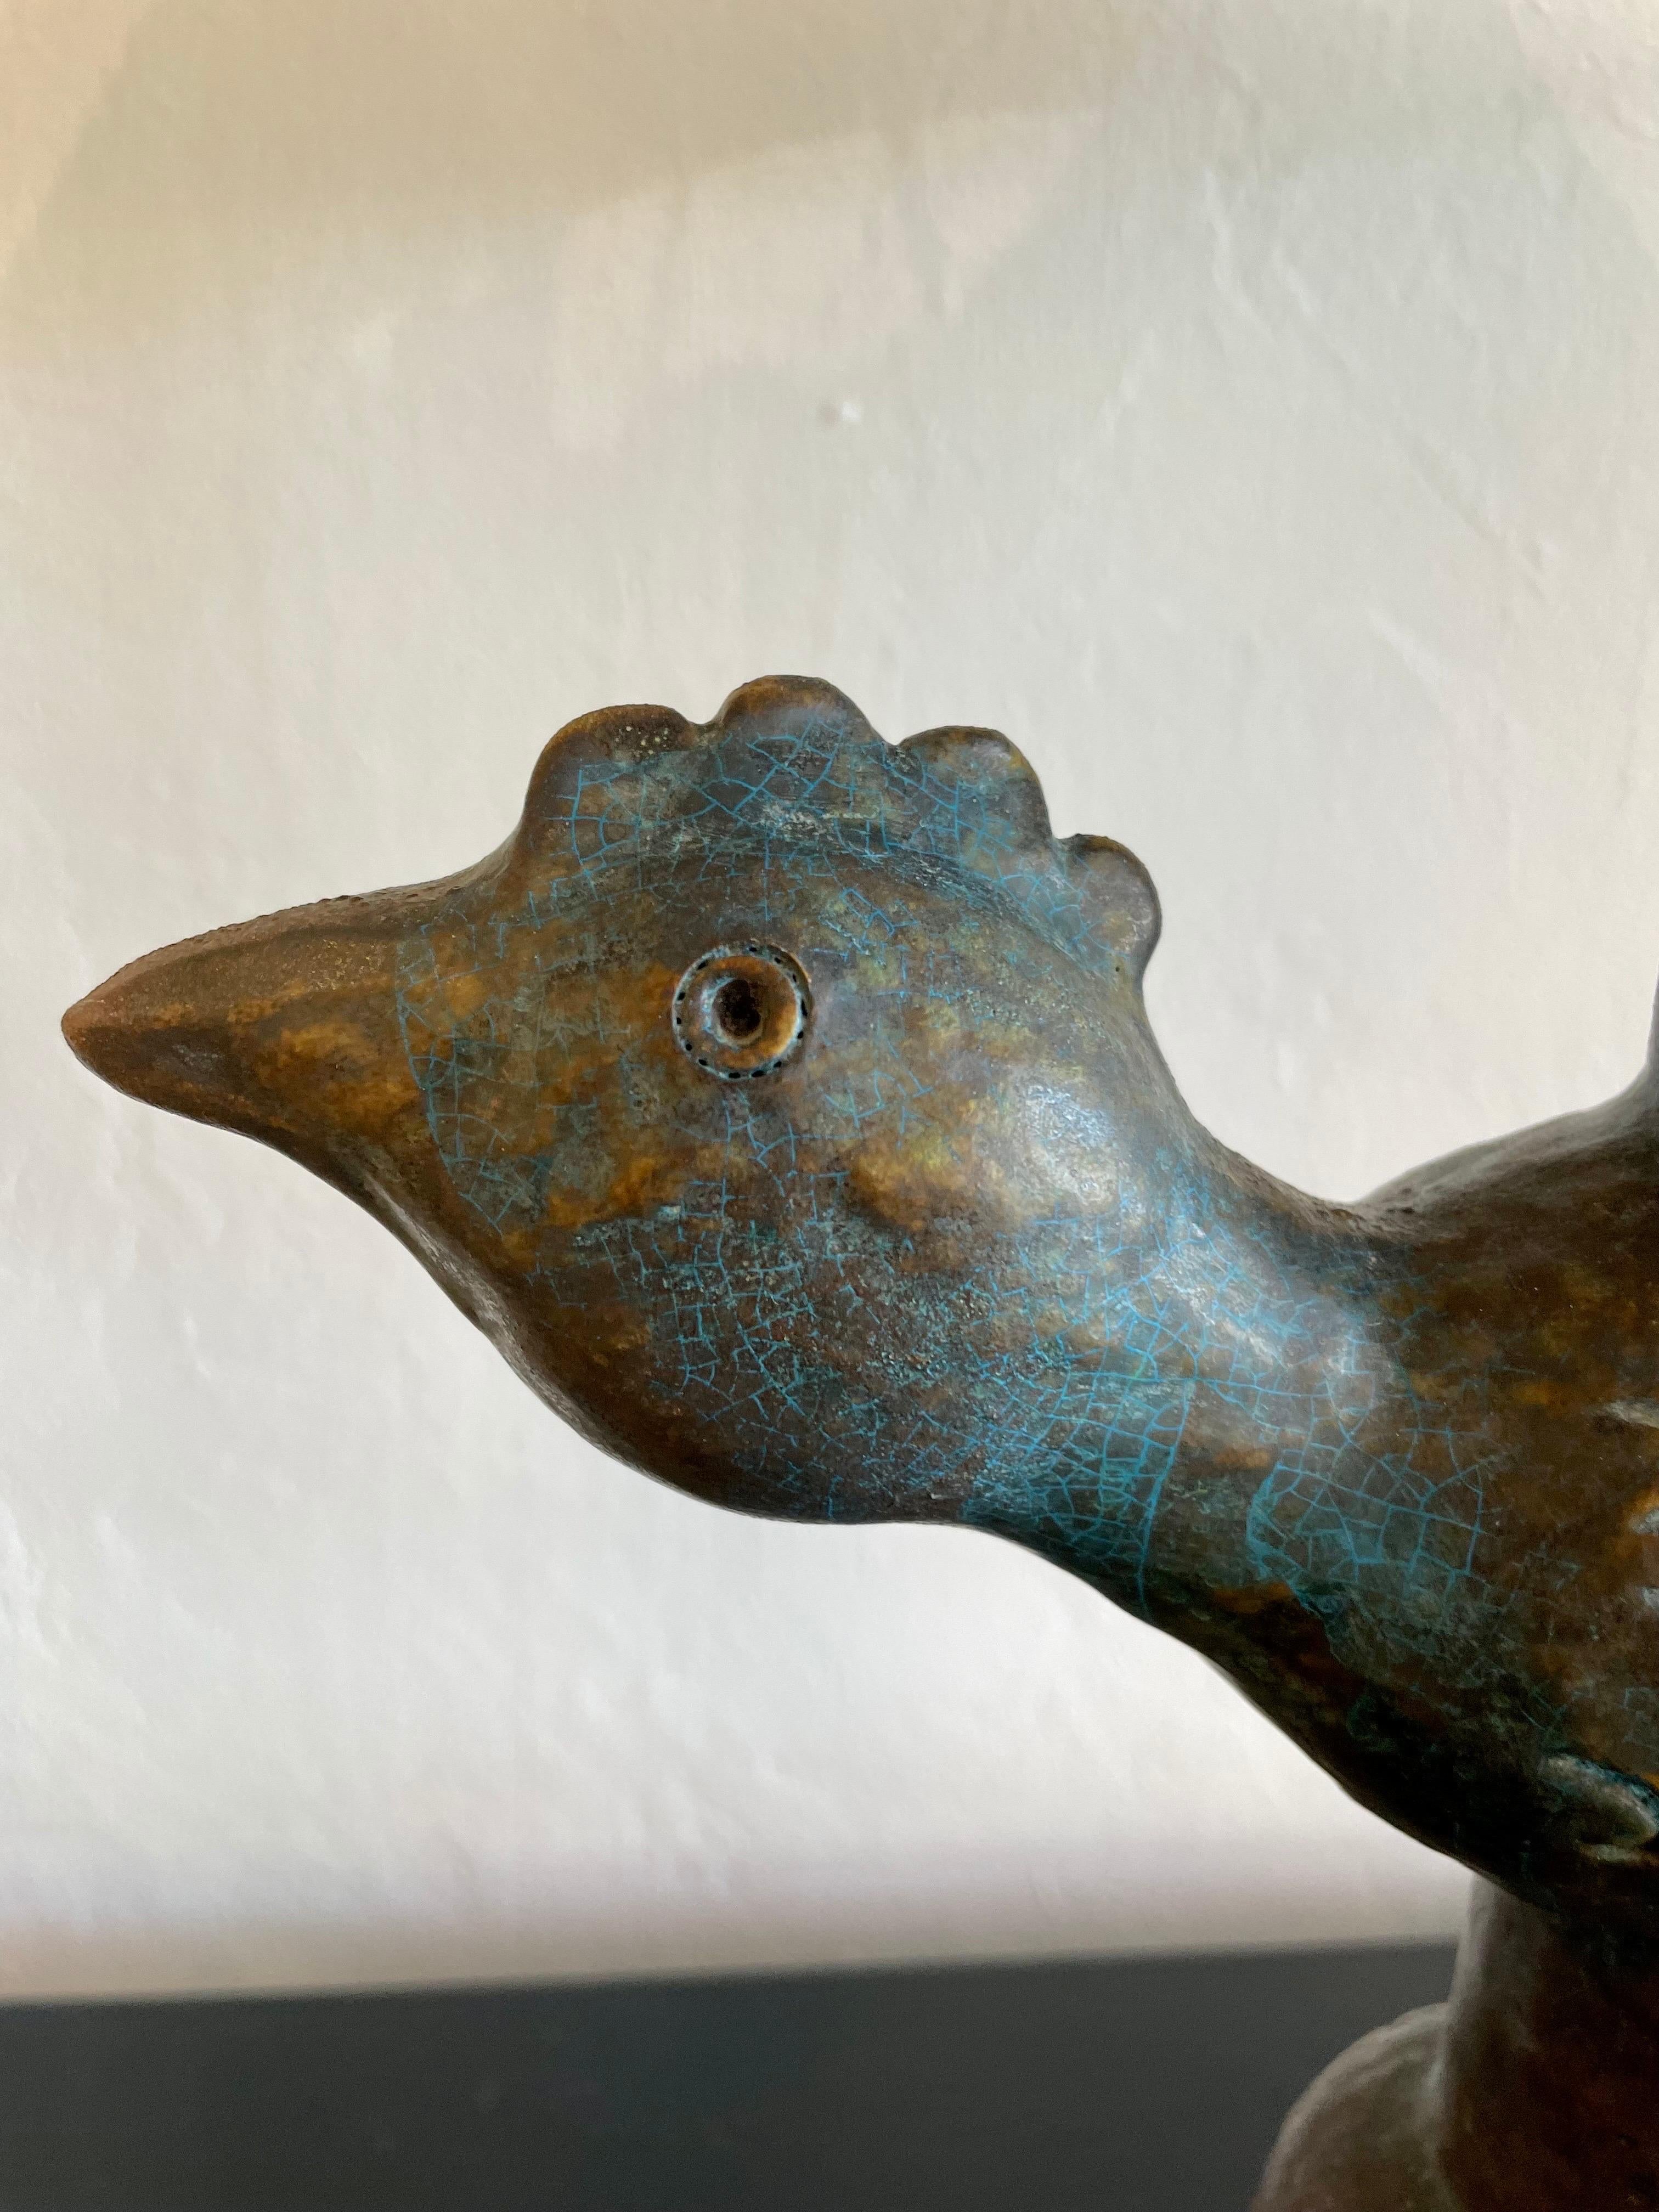 Finished in the most wonderful Etruscan glaze, this ceramic lamp depicting a rooster has touches of blues, greens, yellows, under the overlayer. Wired and working. note: shade shown not included.